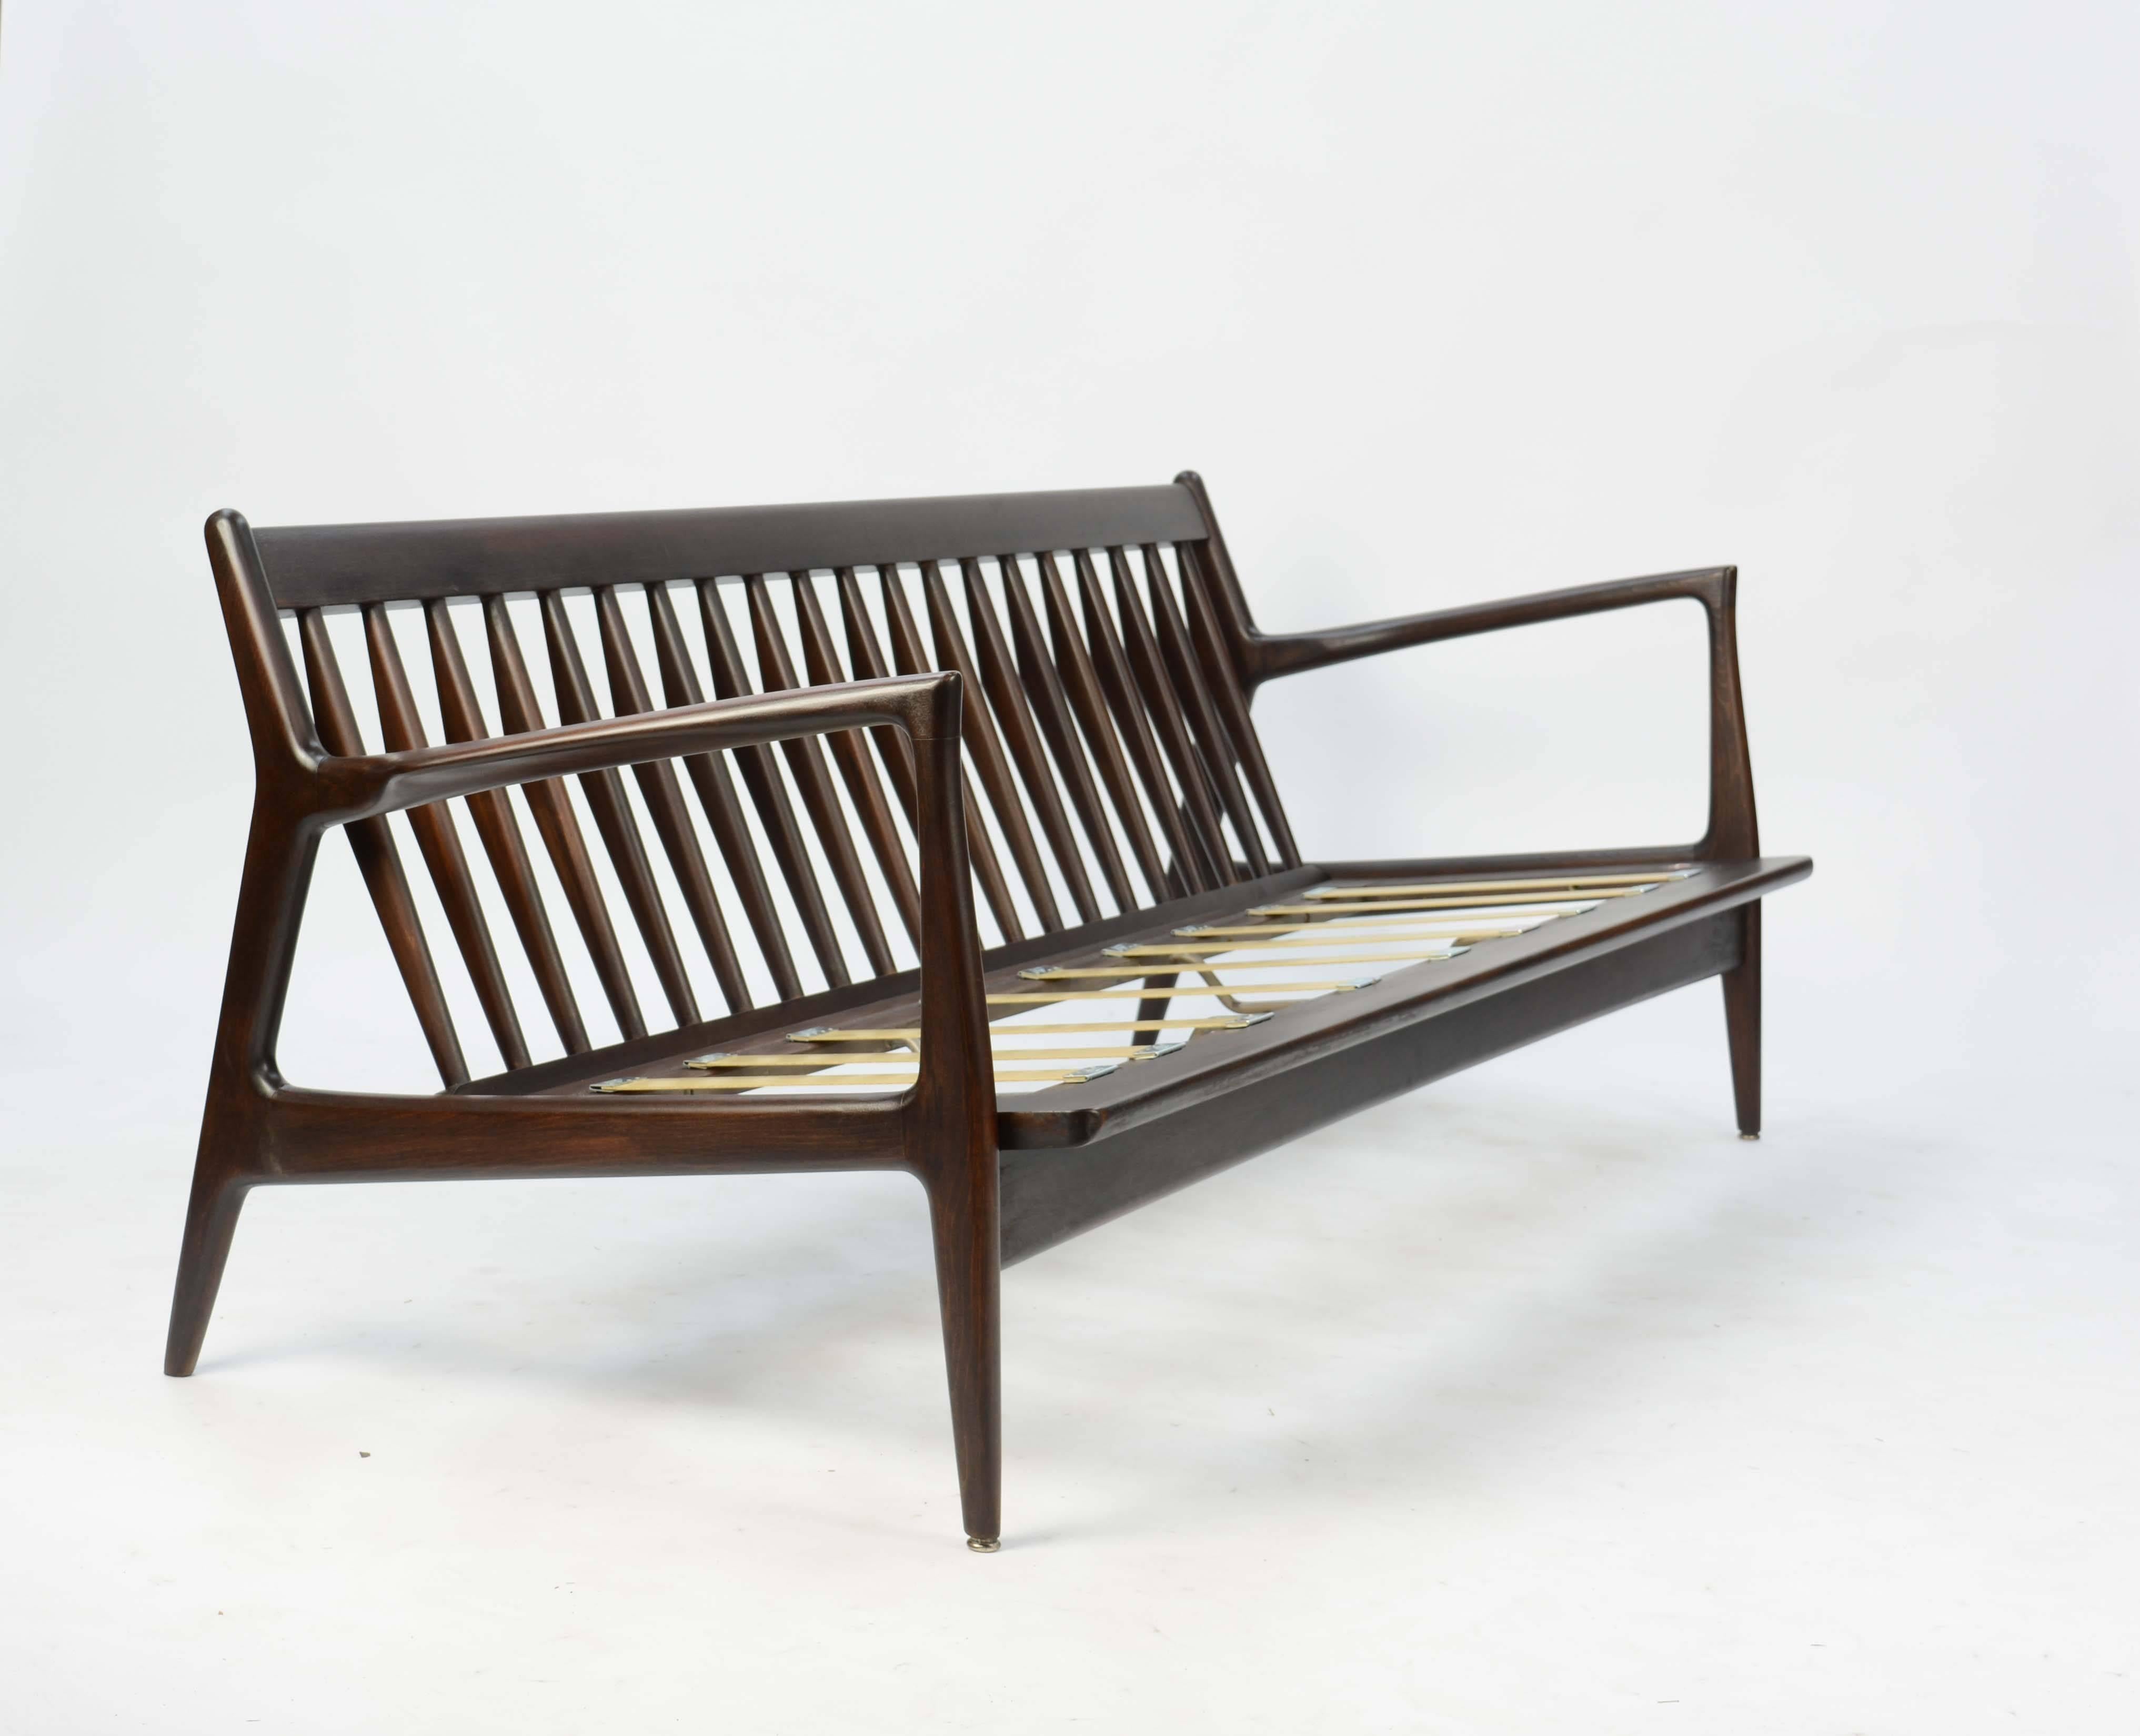 Mid-20th Century Ib Kofod-Larsen Sofa for Selig of Denmark with the Flair Arms and Diamond back